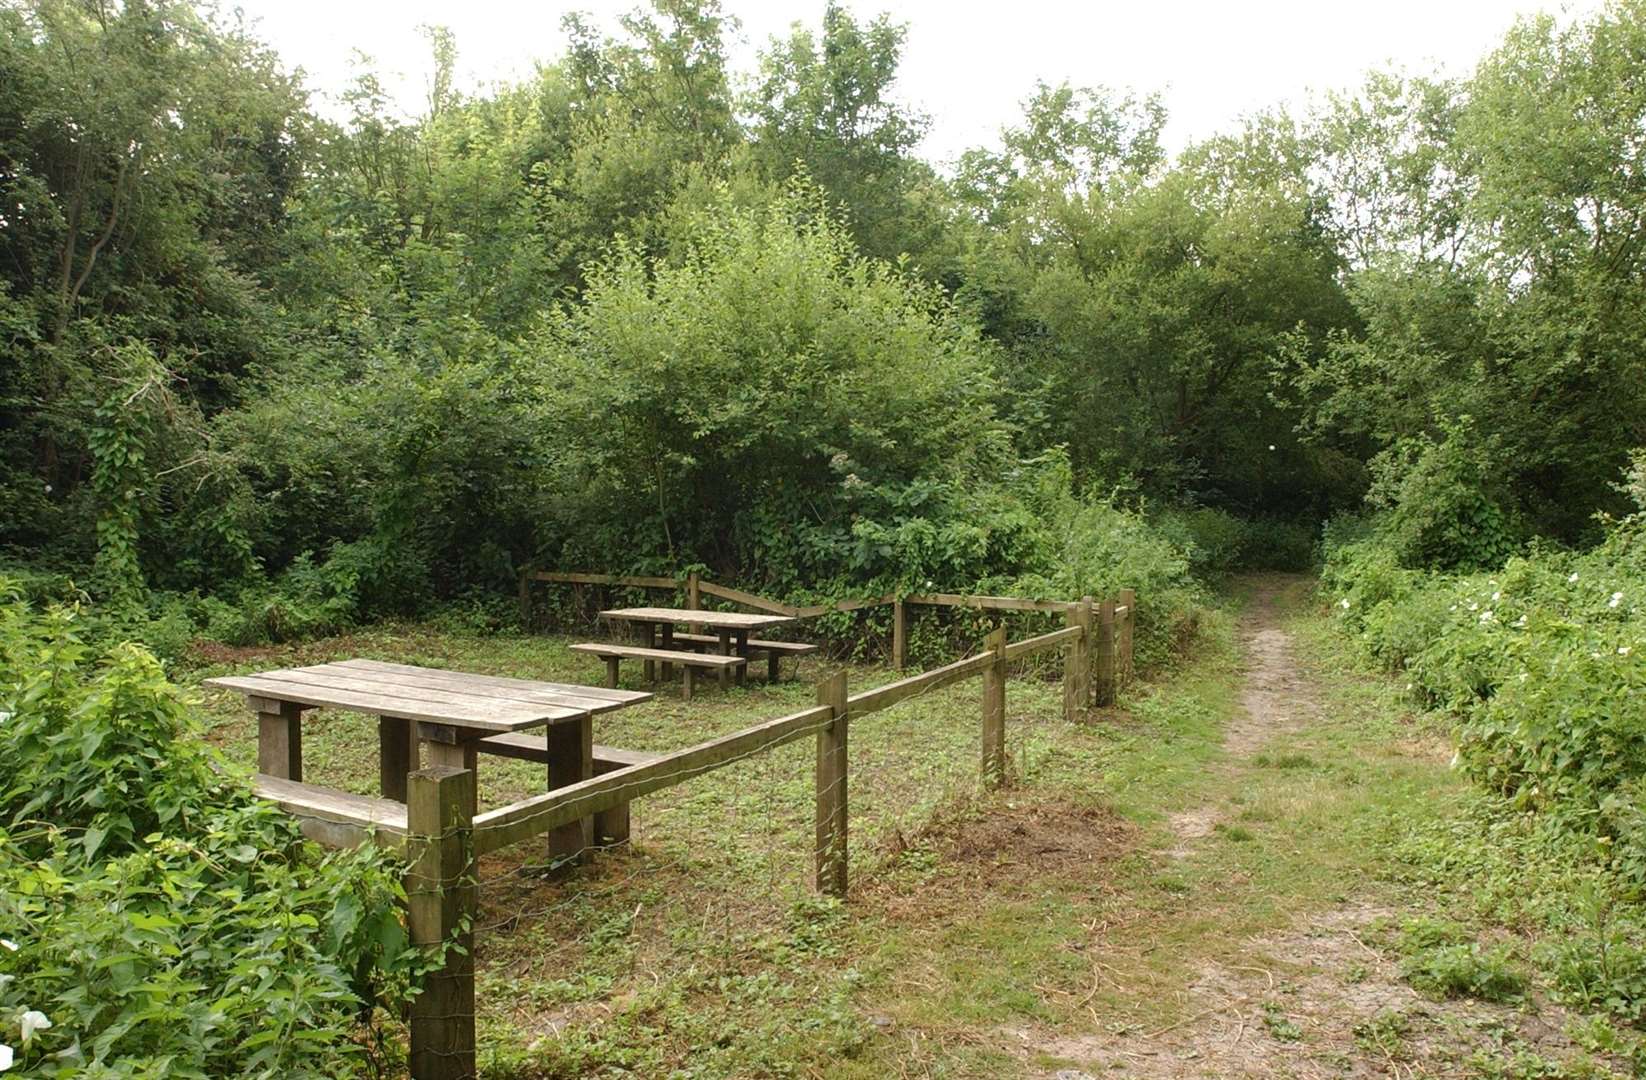 Some of the money will go towards Berengrave Nature Reserve